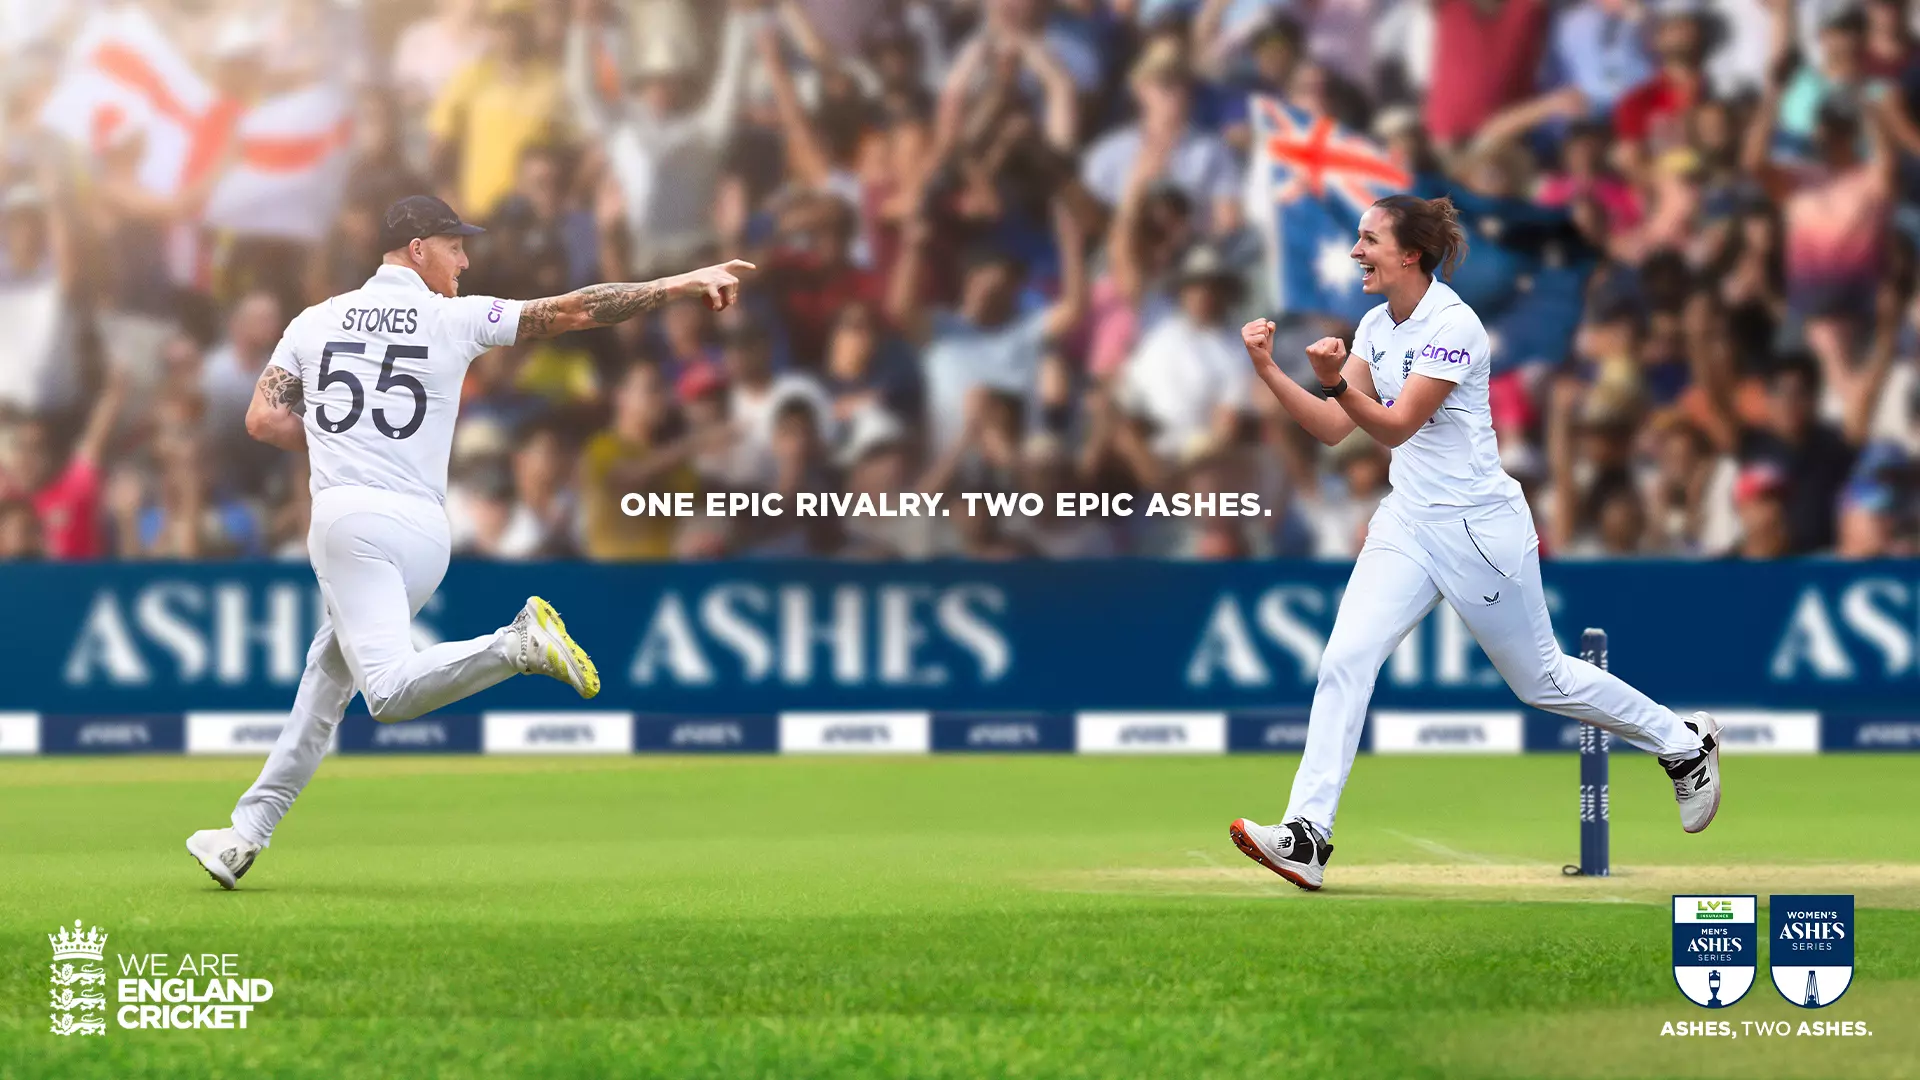 The campaign Ashes, Two Ashes was a big hit for the English Cricket Board.